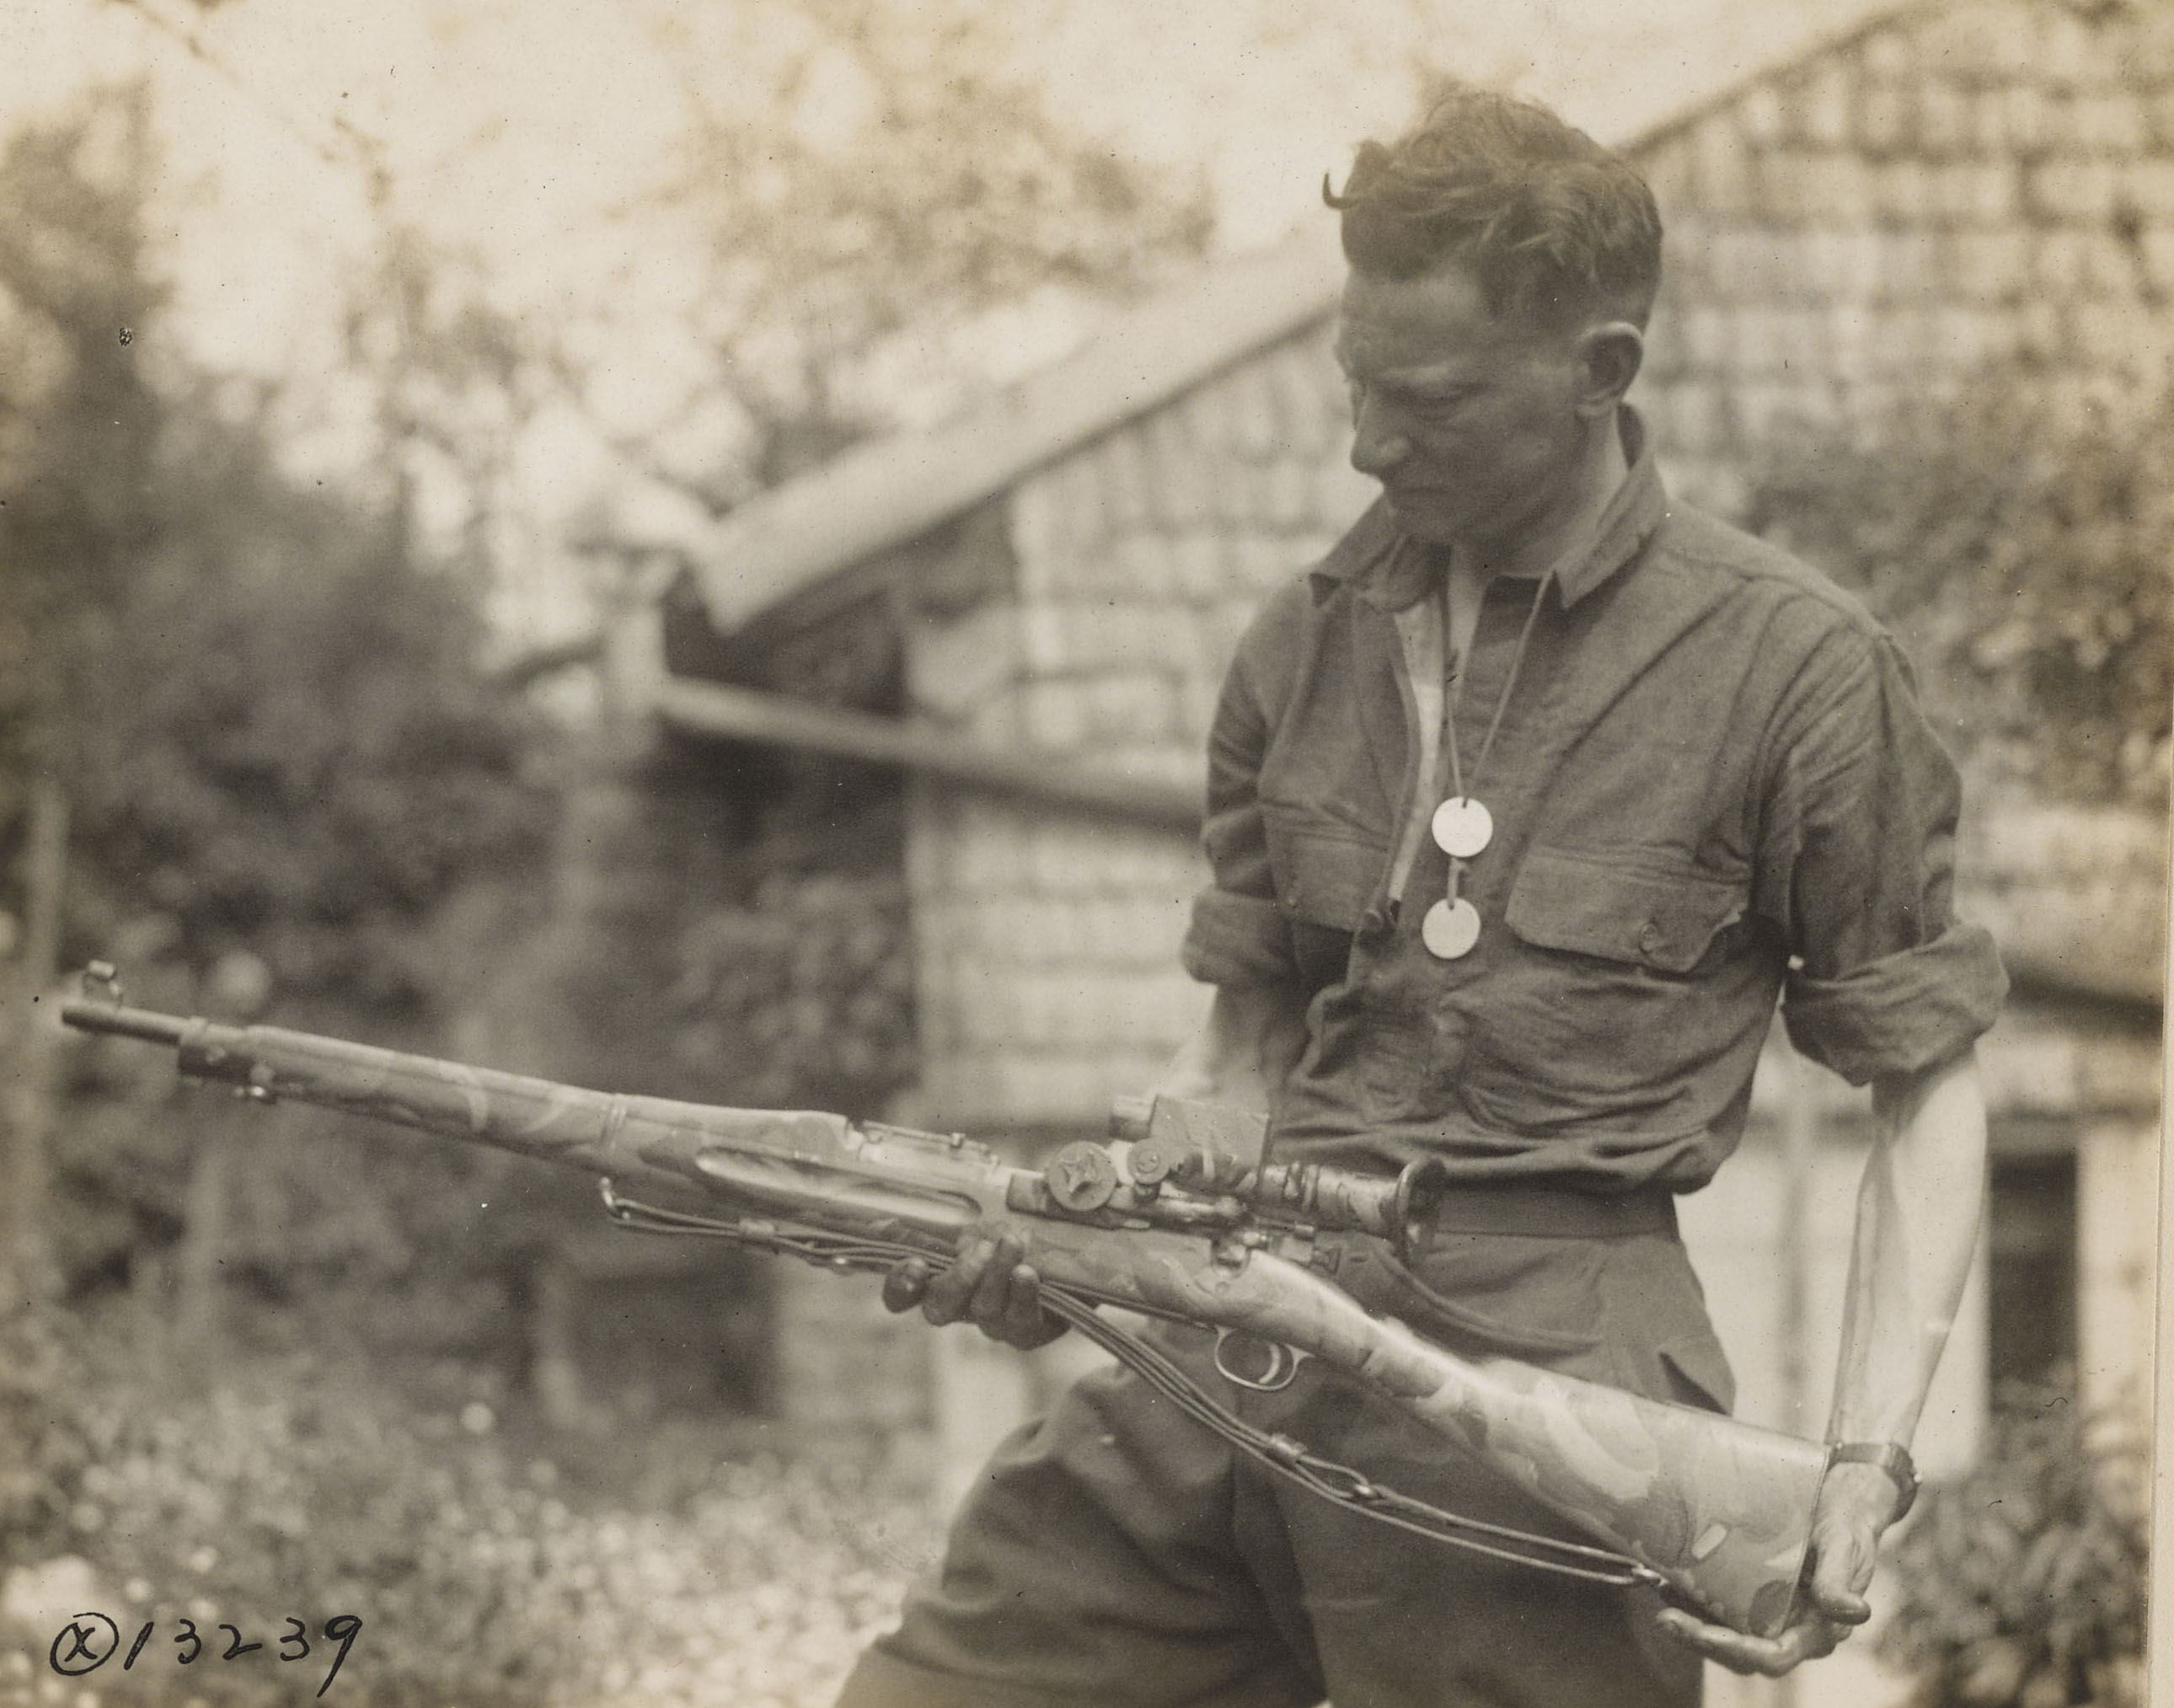 Historic photo shows man with rifle in hand. 